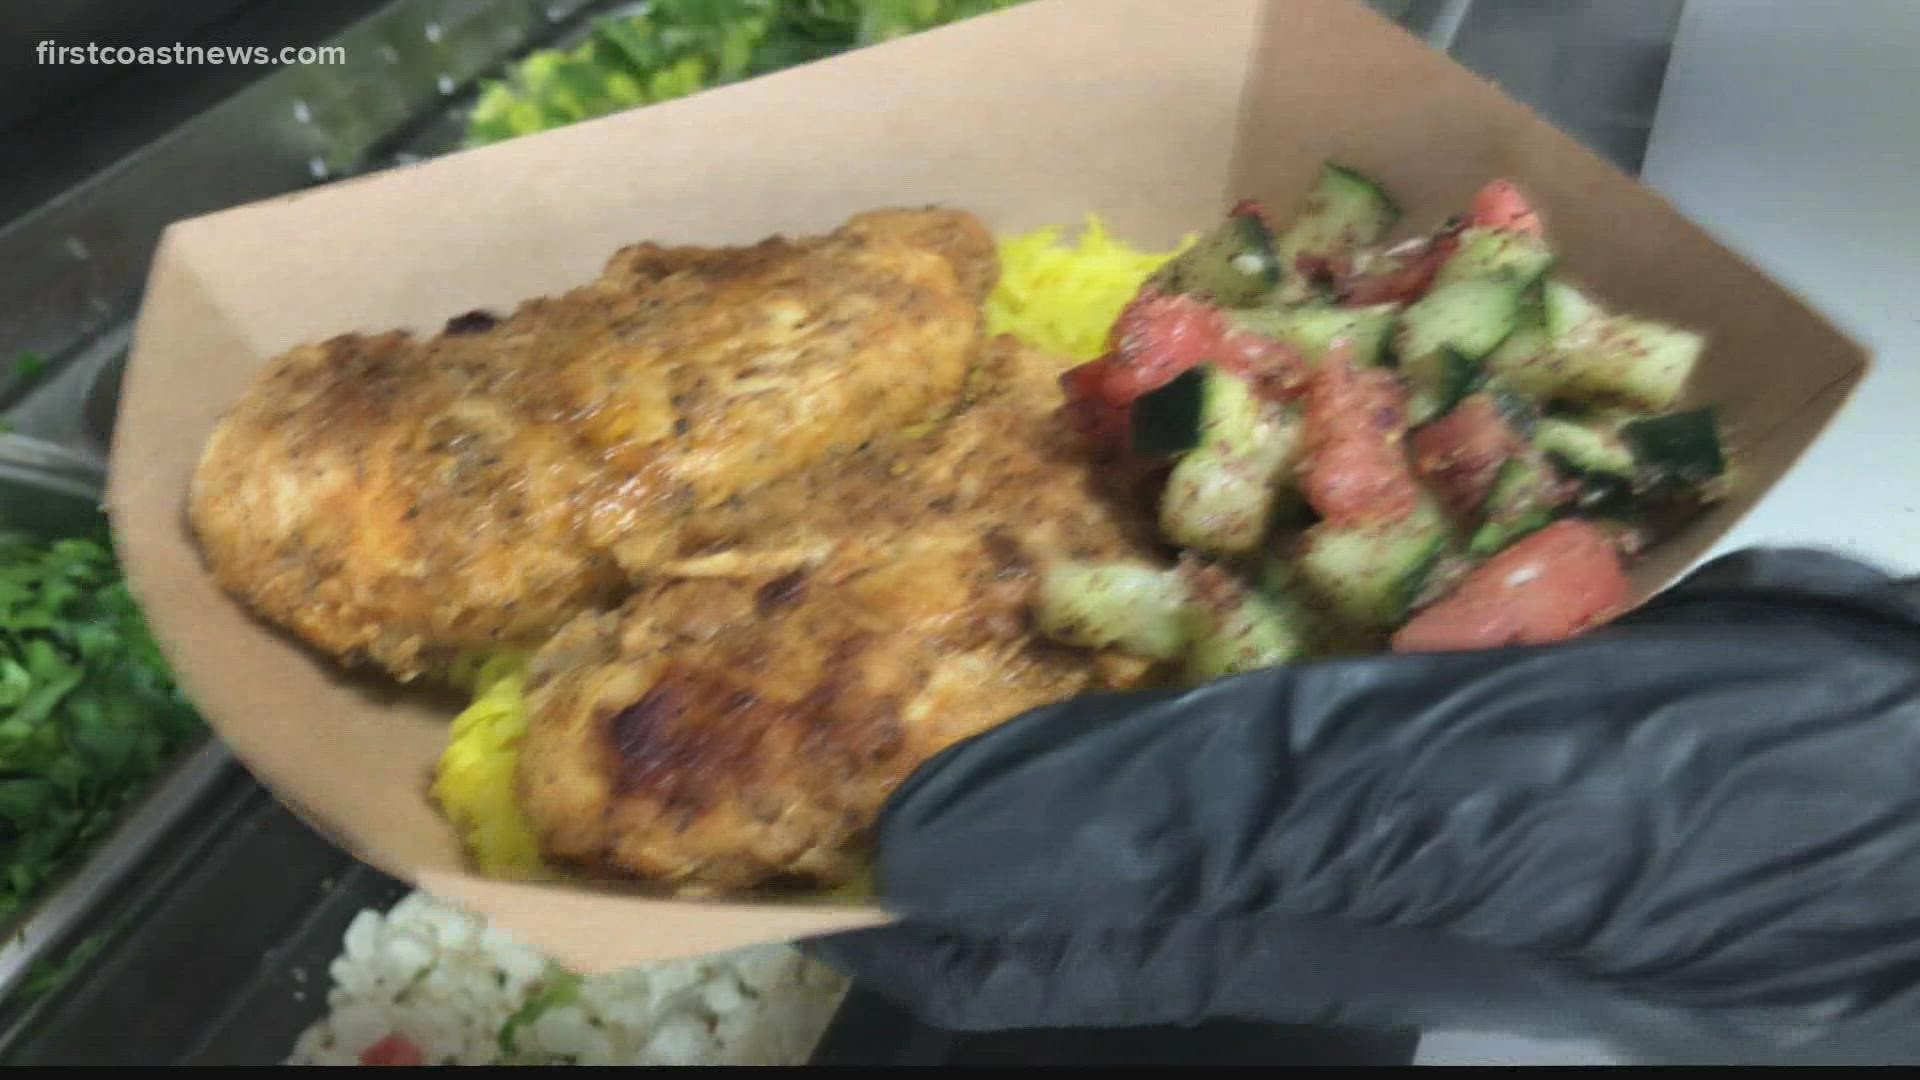 904 Food Trucks are serving up new food for The Players at TPC Sawgrass.